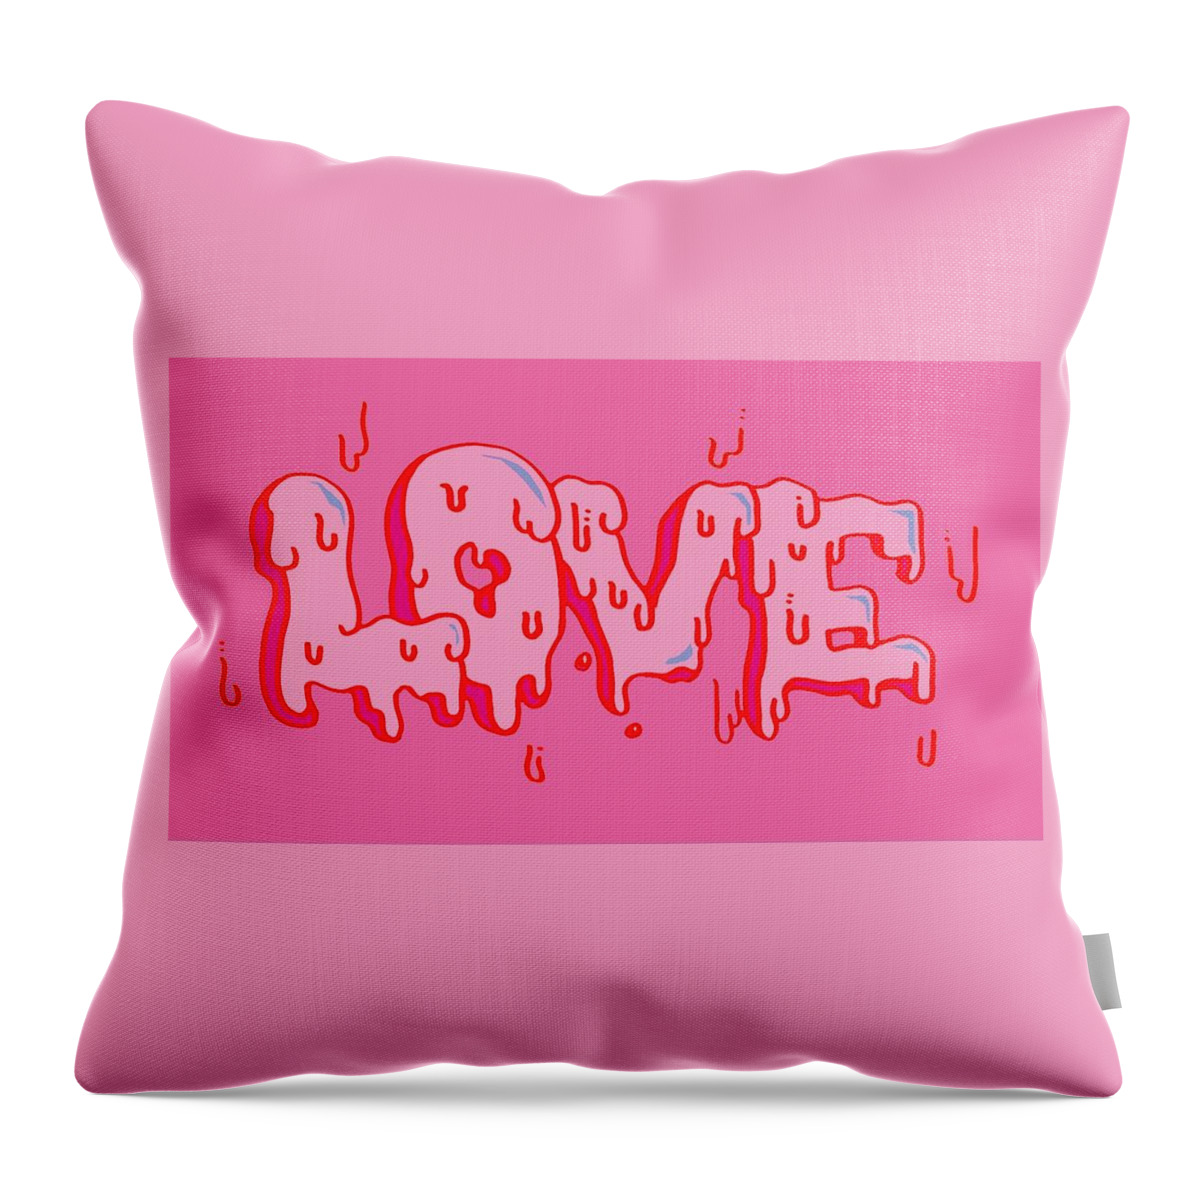 Love Throw Pillow featuring the digital art Love by East village mountain